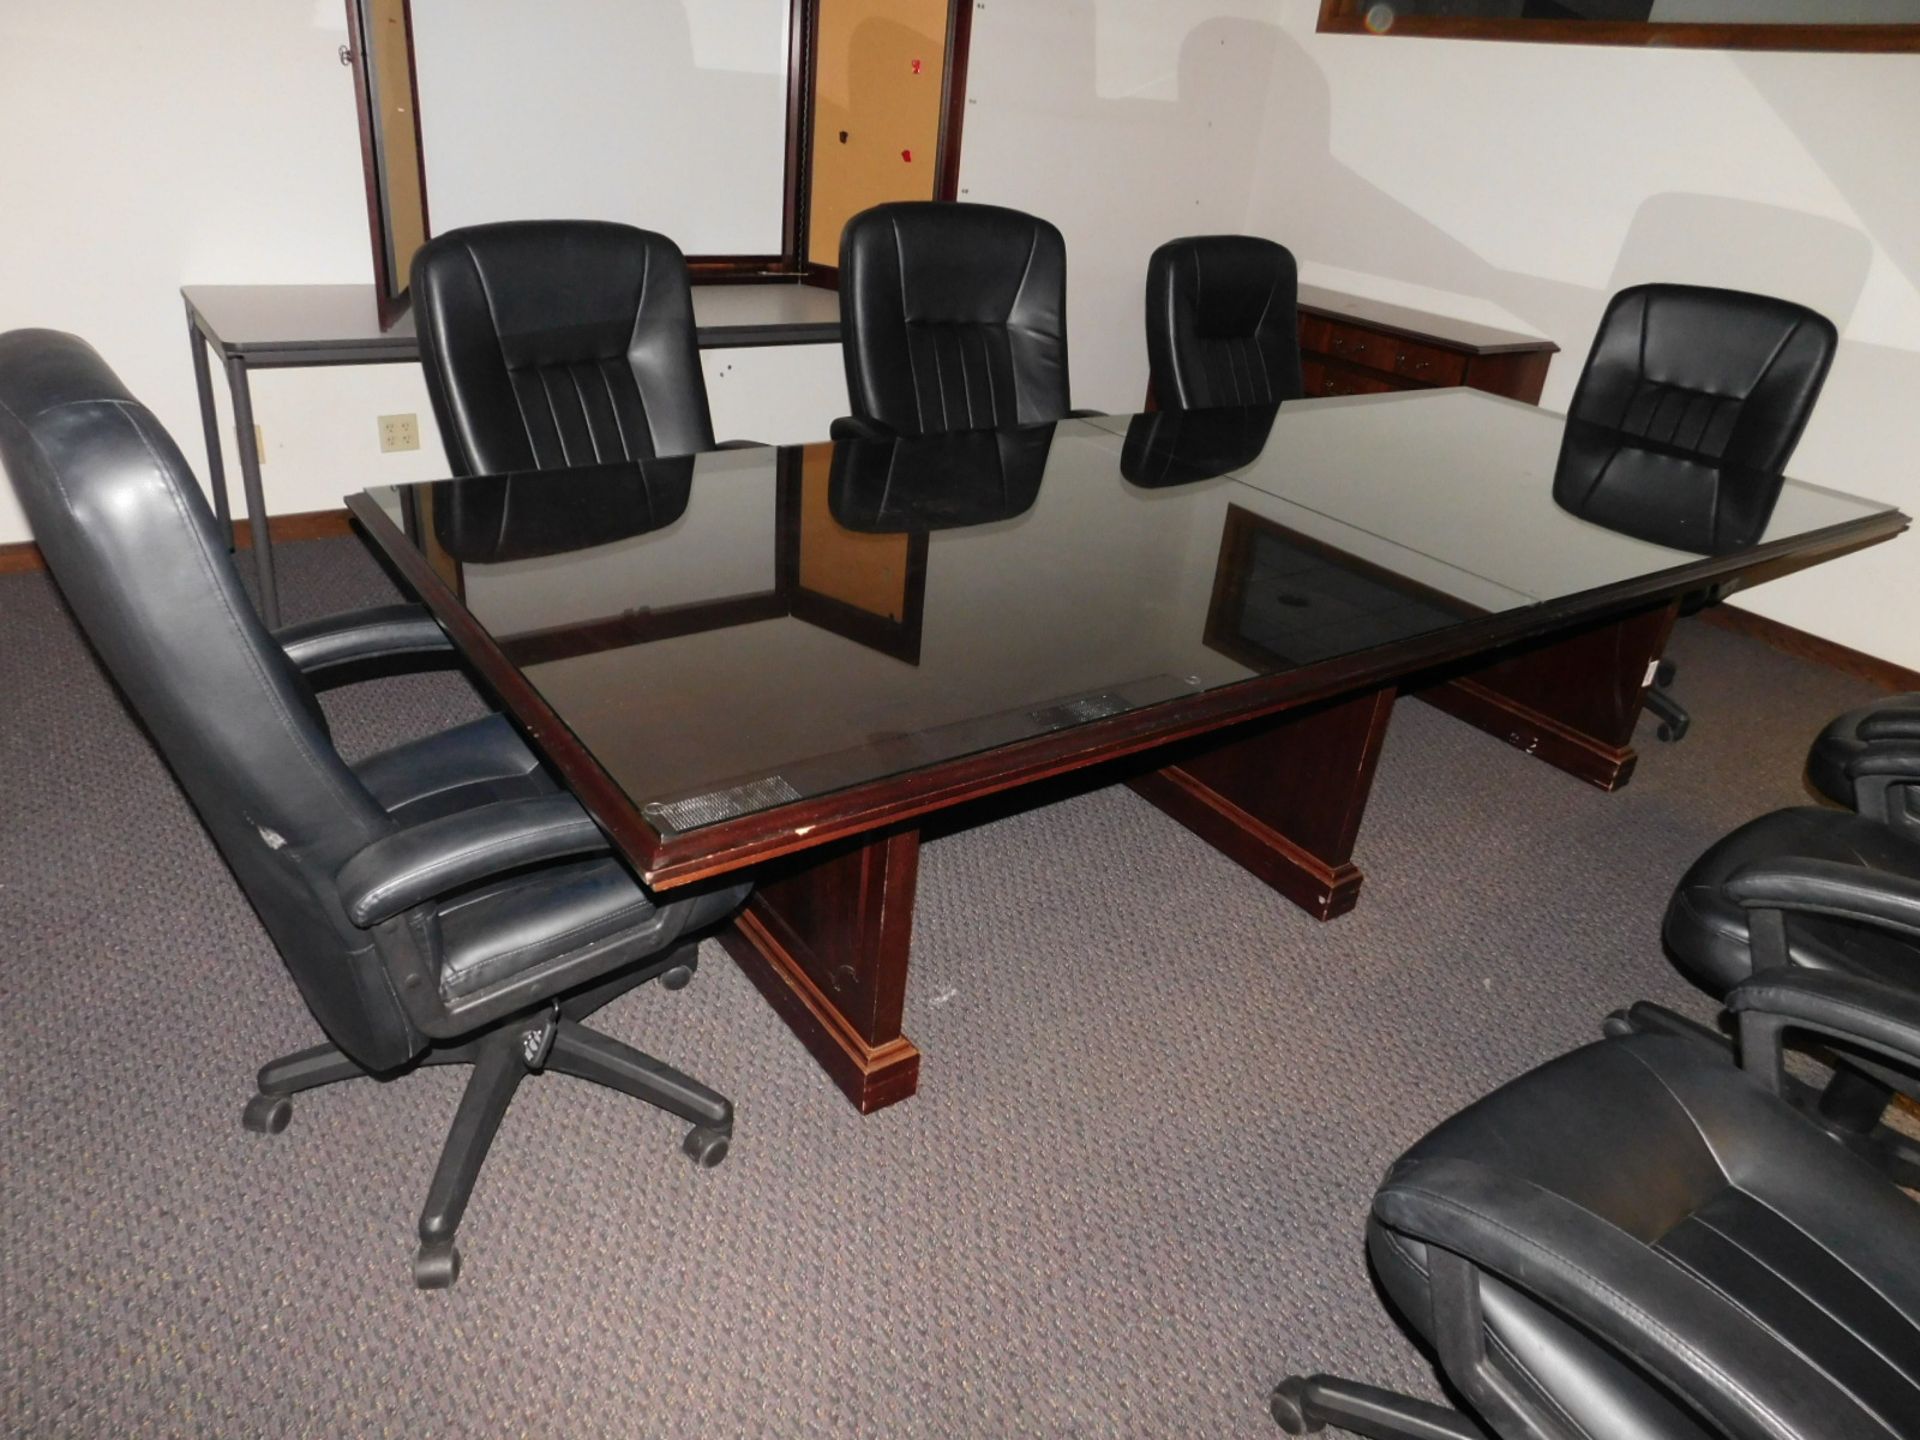 PAOLI 42" X 10' TRADITIONAL CONFERENCE TABLE - MAHOGANY - GLASS TOP - REALLY NICE TABLE - Image 2 of 2